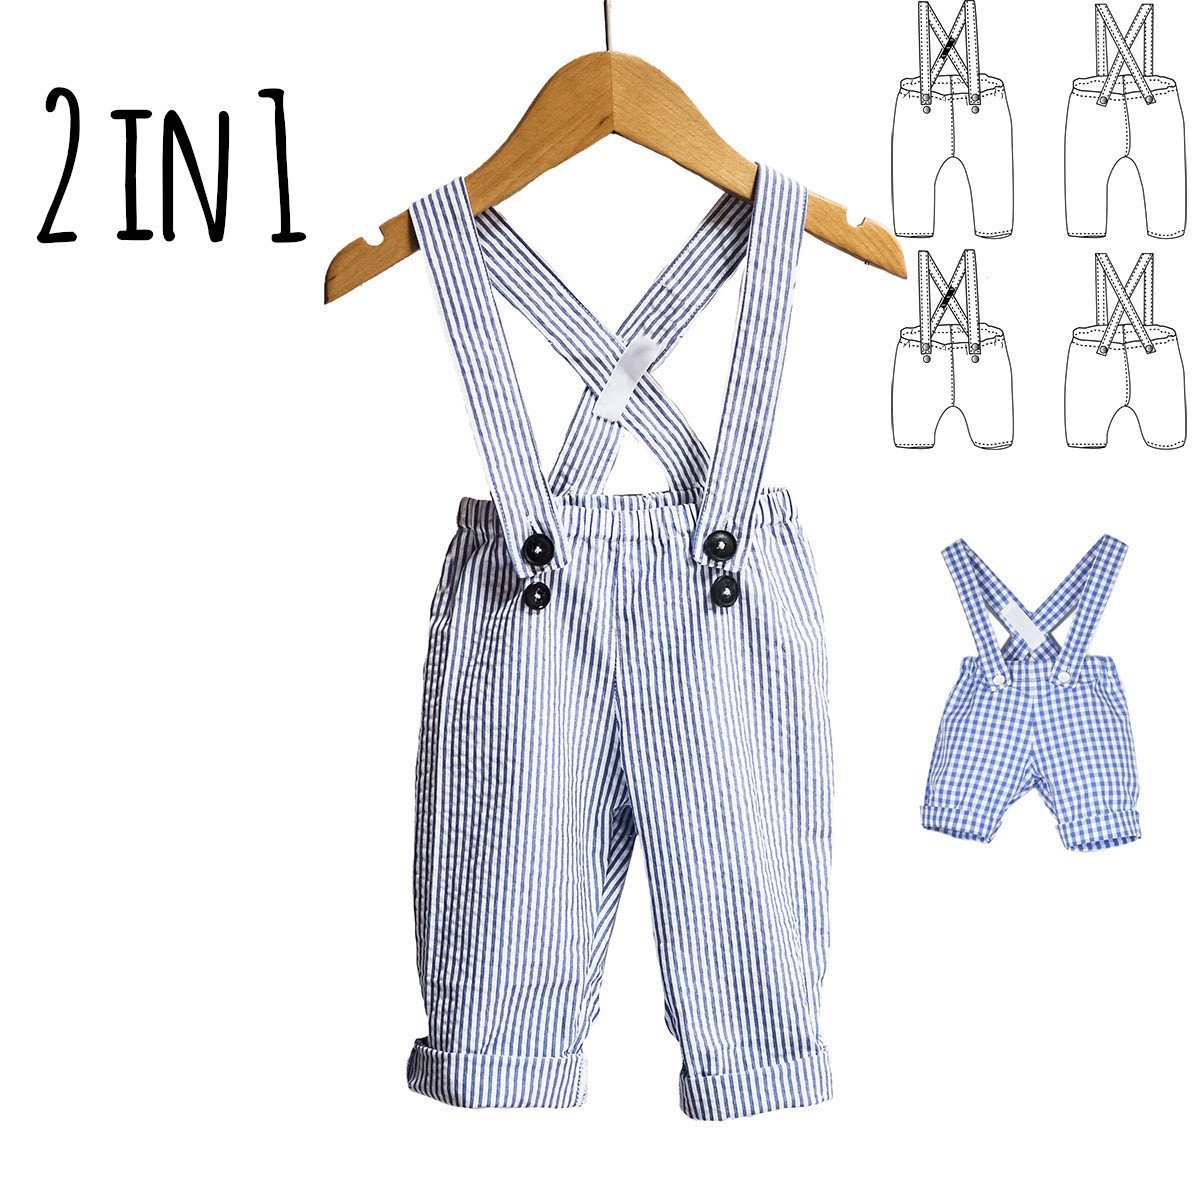 Ikatee - BRIGHTON pants/shorty with suspenders - Baby 6M/4Y- Paper Sewing Pattern